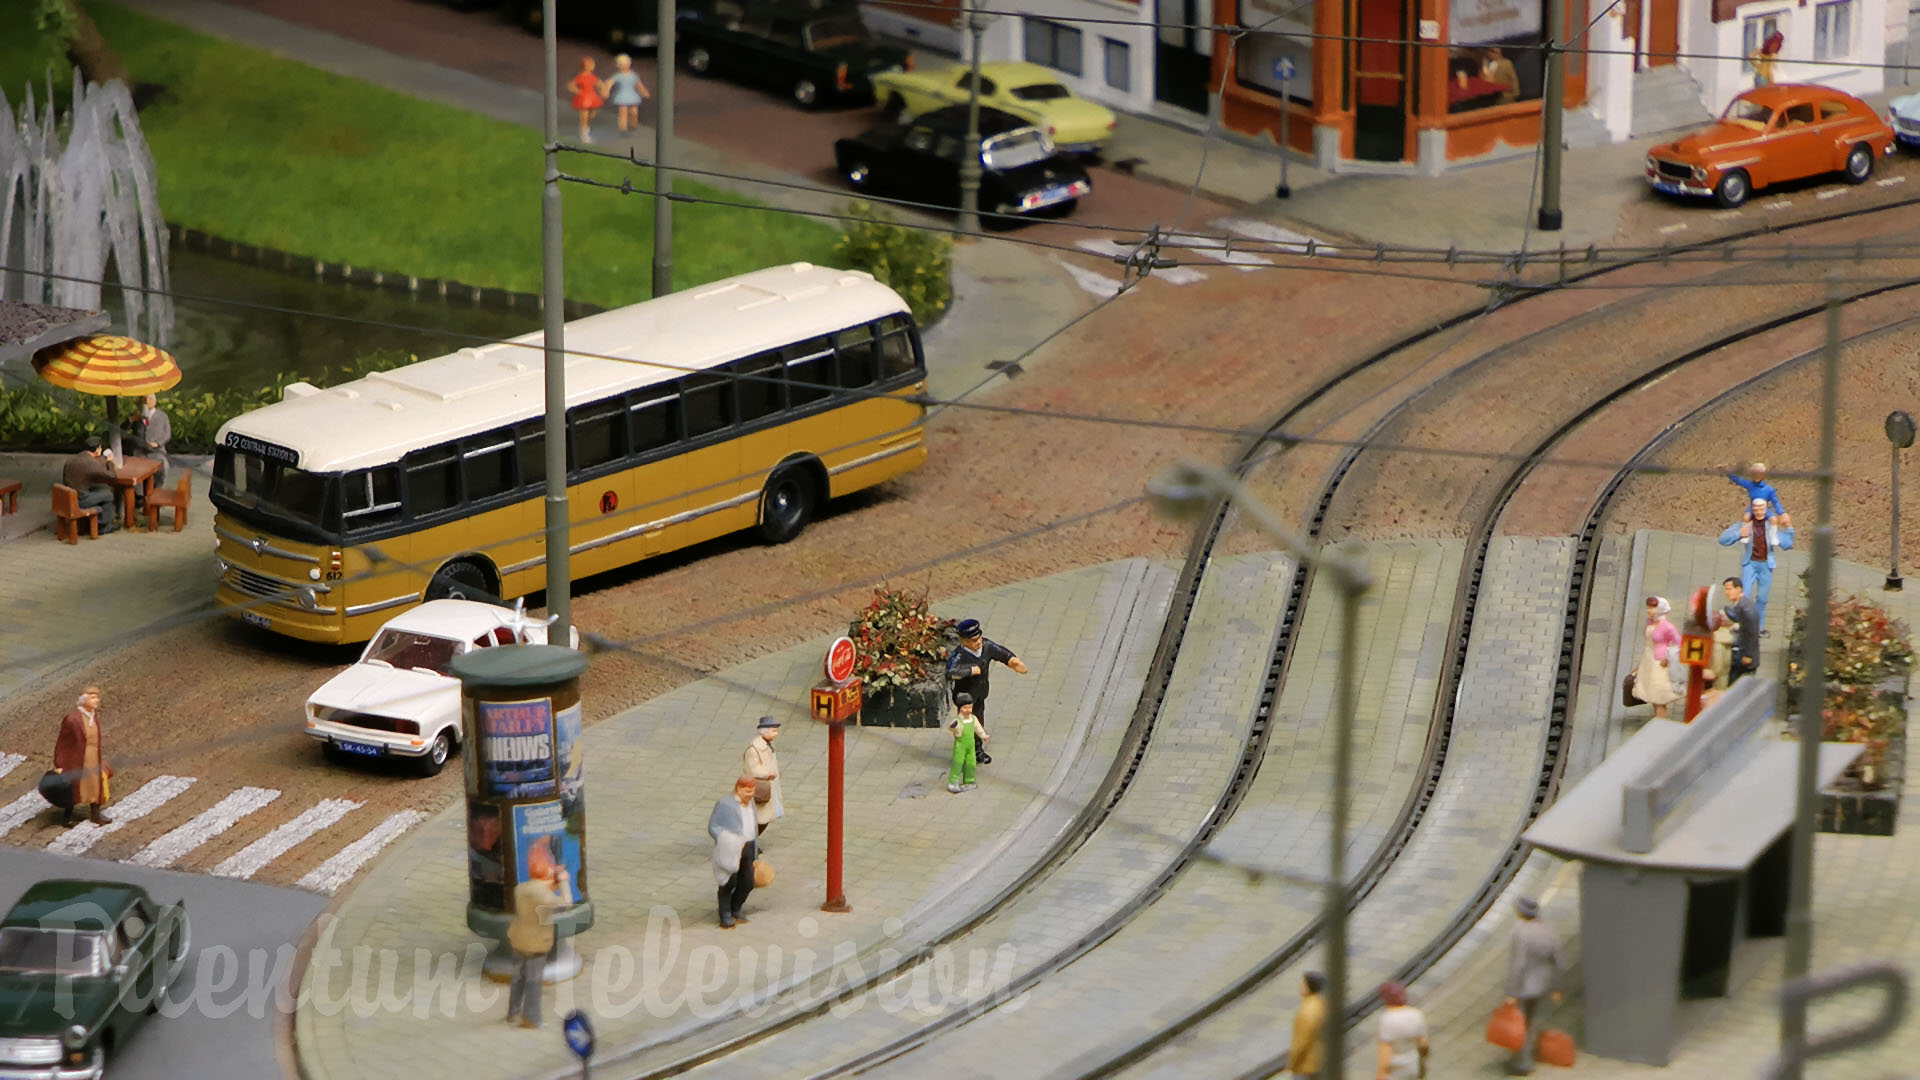 Rotterdam Centraal Railway Station - Model Rail Layout with Trams and Trains in HO Scale by Thom Raven